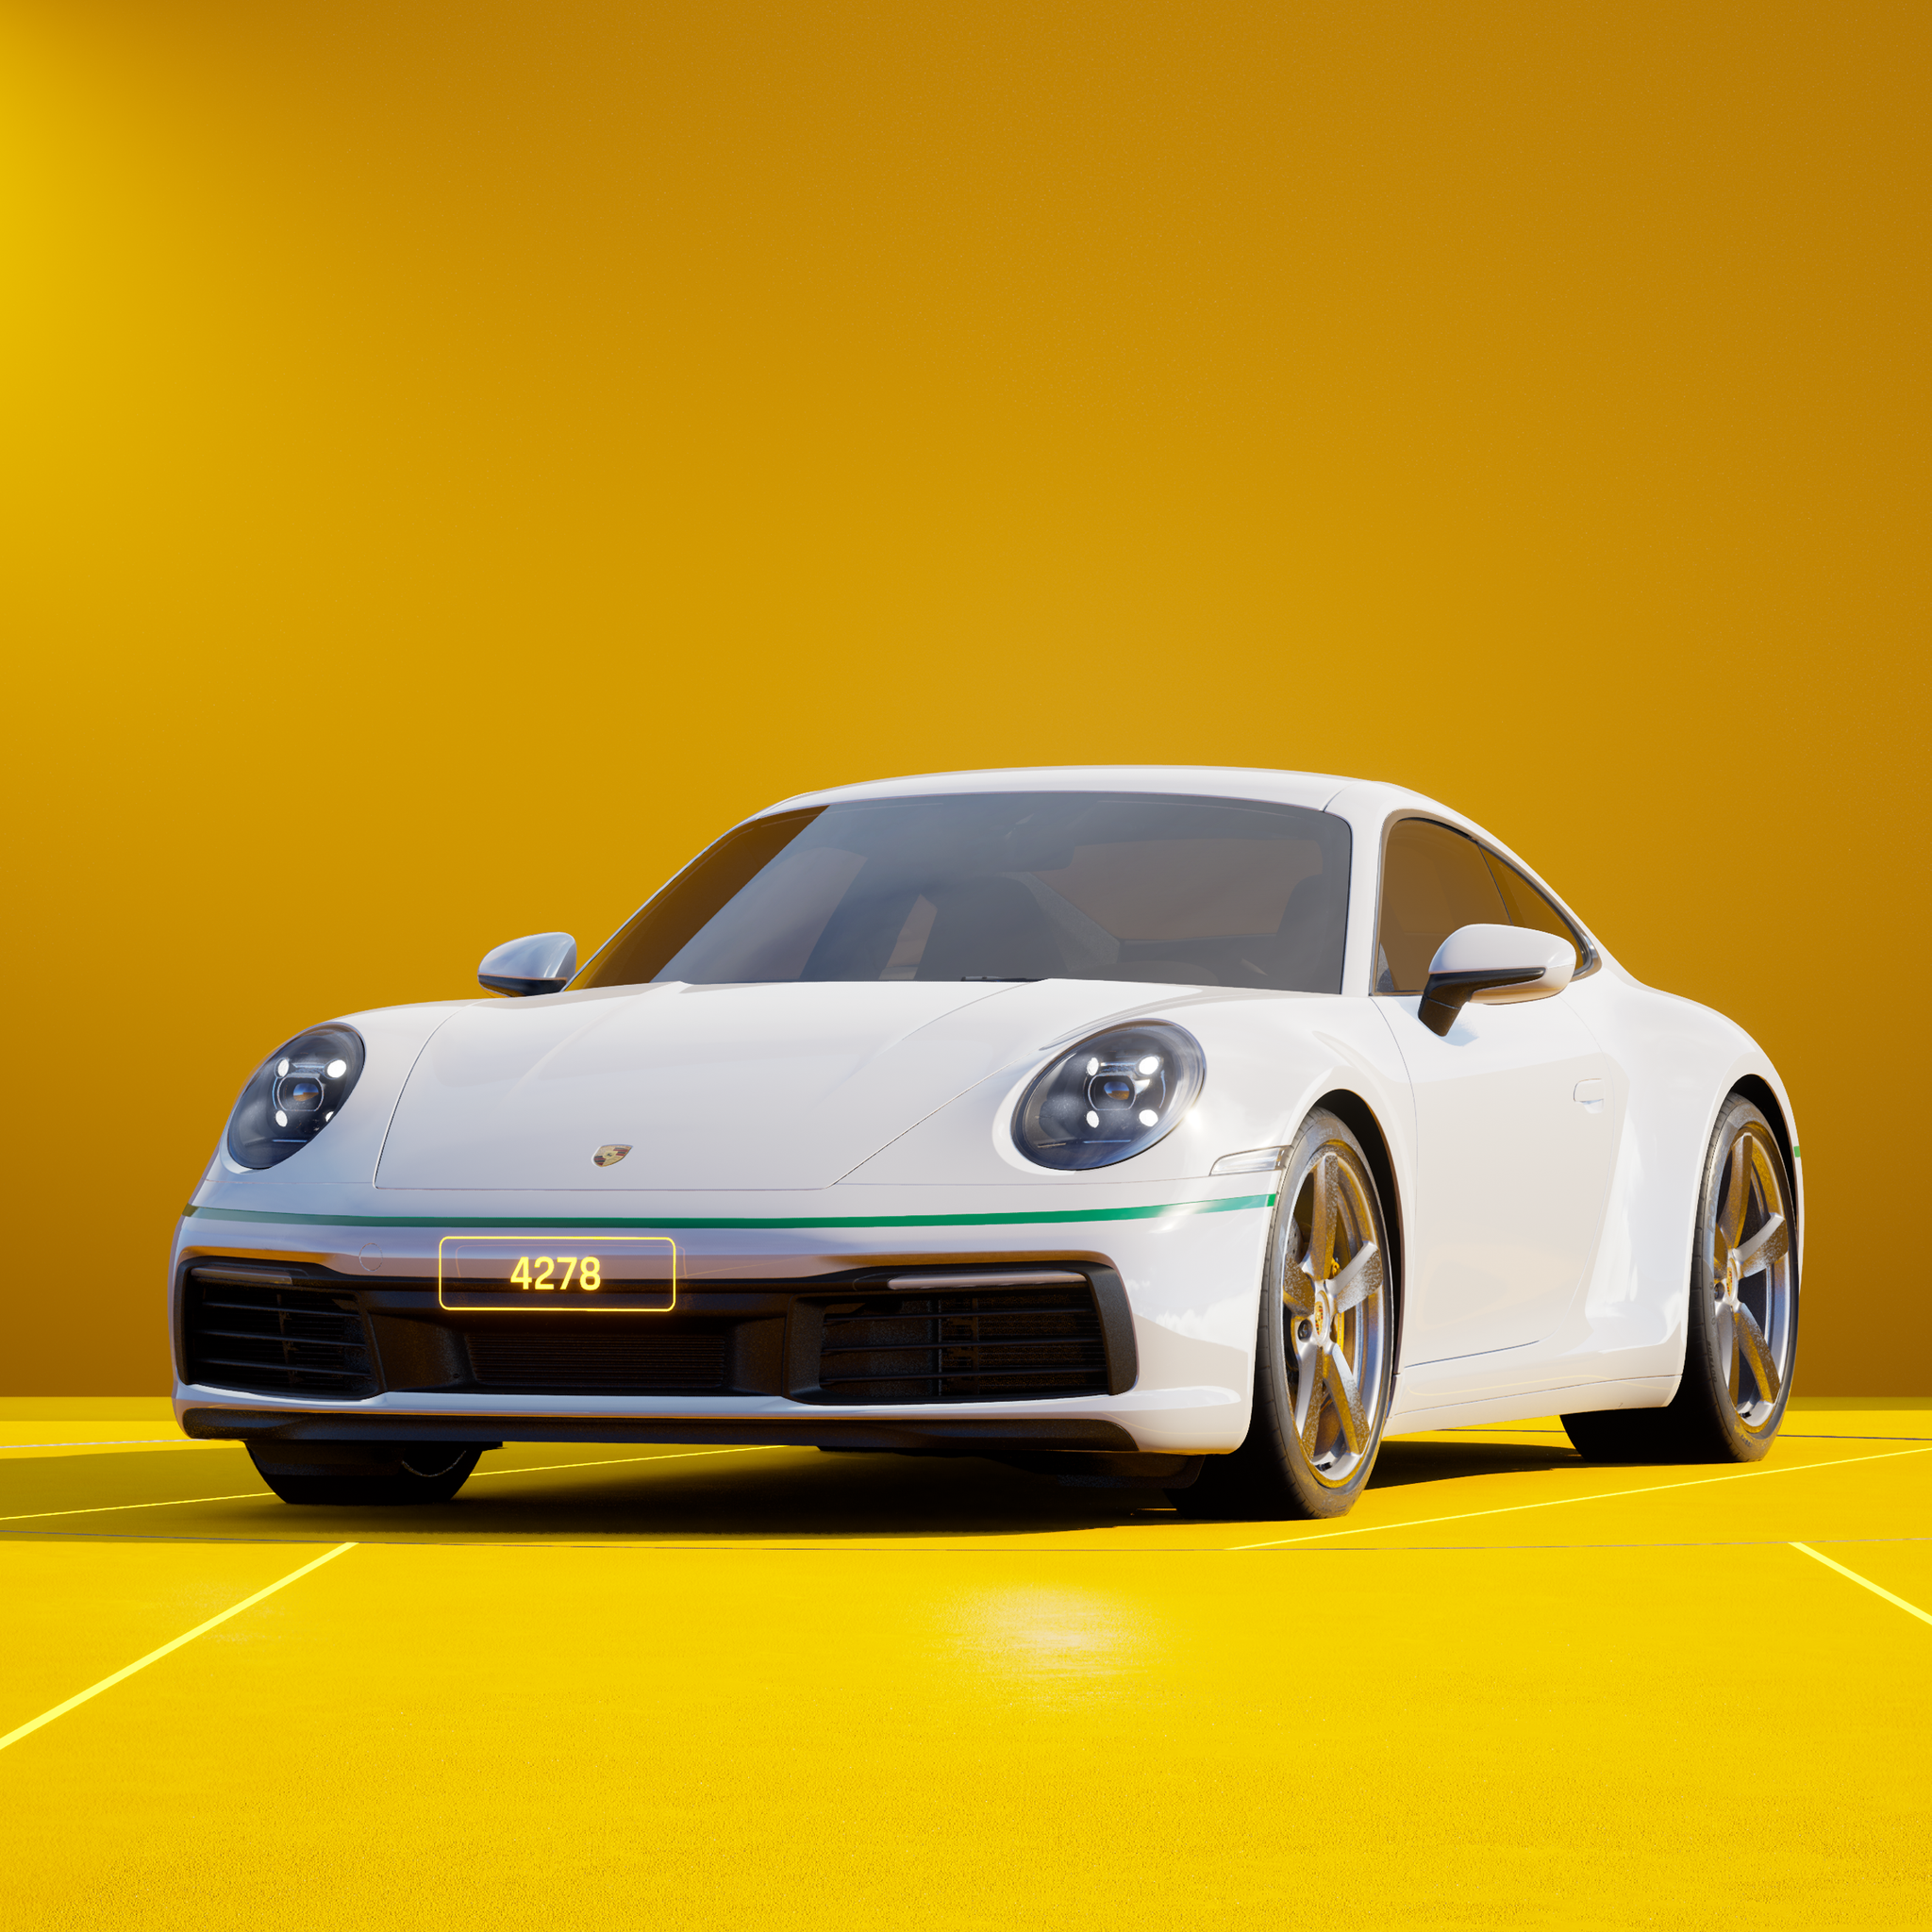 The PORSCHΞ 911 4278 image in phase